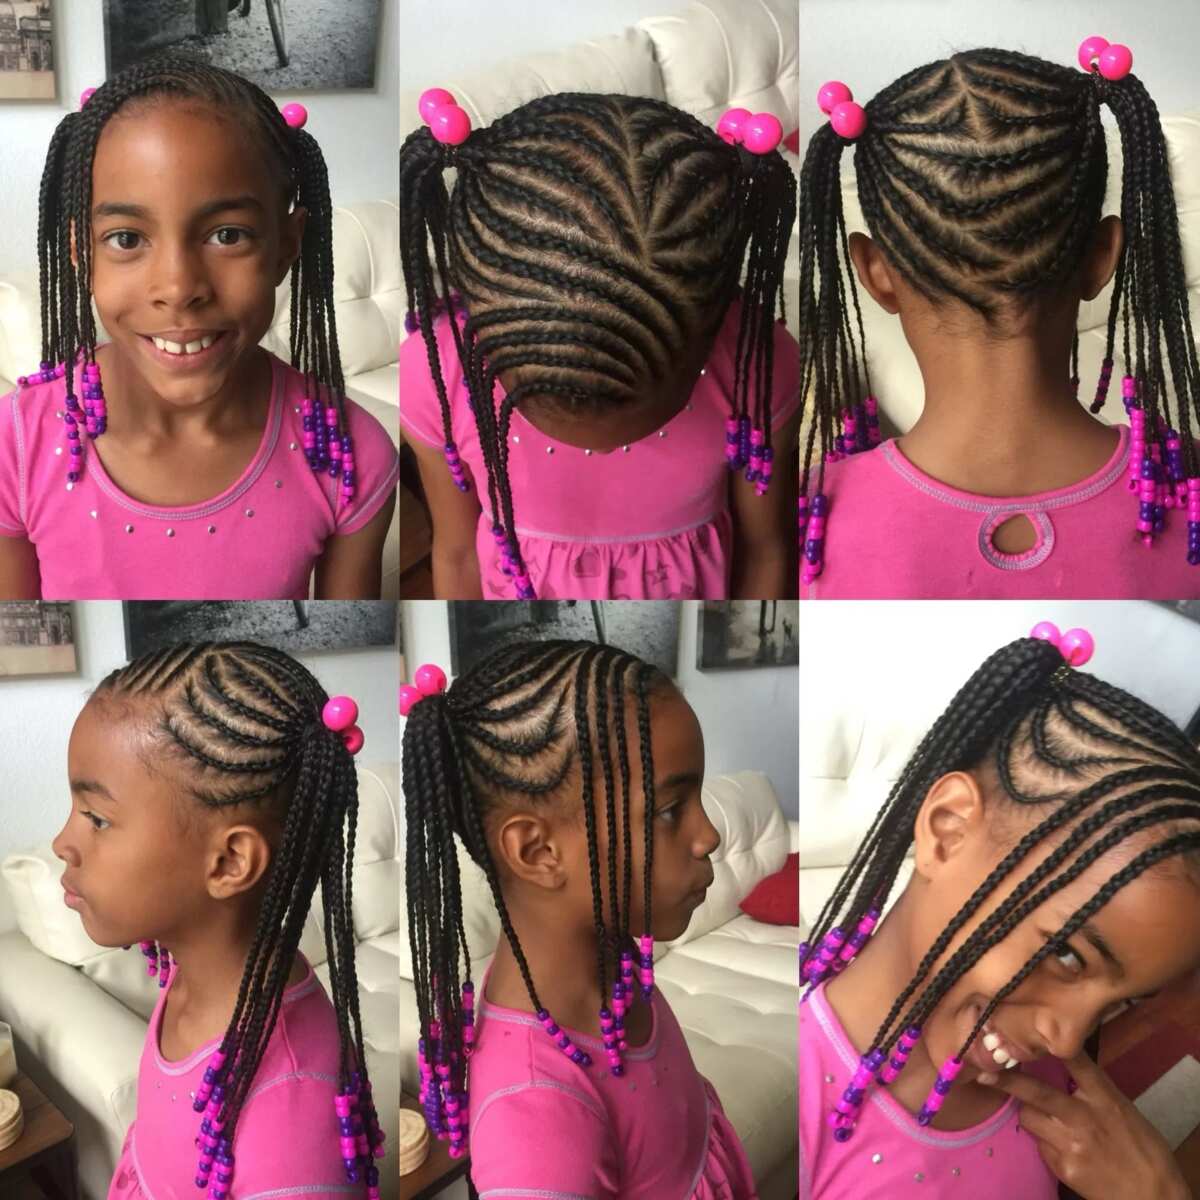 Kids' hair: 5 quick and easy braids - Today's Parent